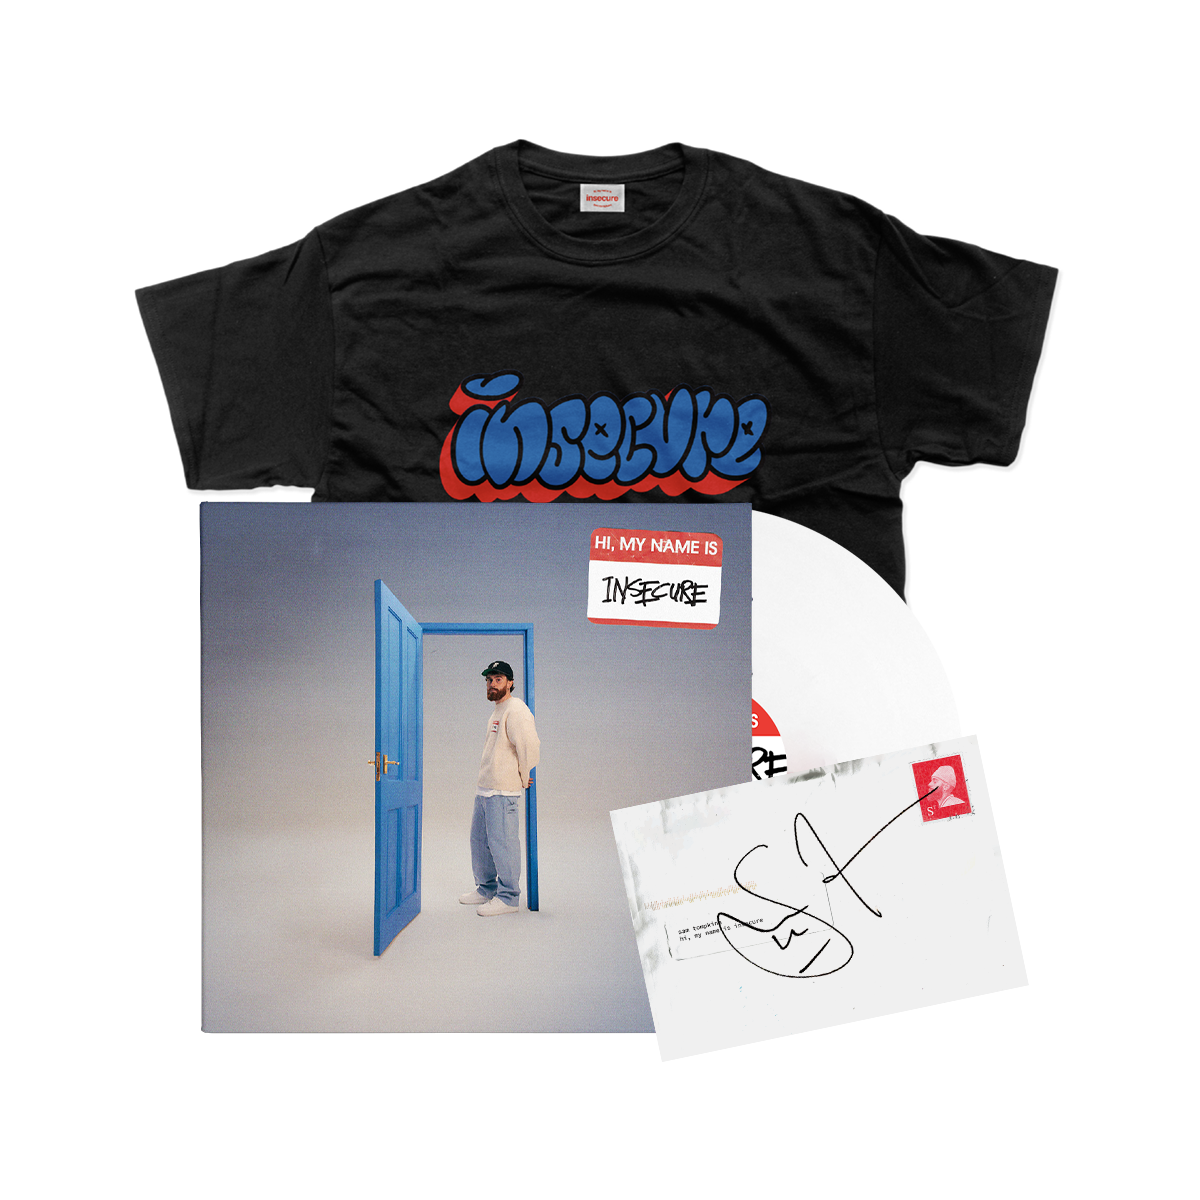 hi, my name is insecure: Limited Red/White Split Vinyl LP, T-Shirt + Signed Art Card